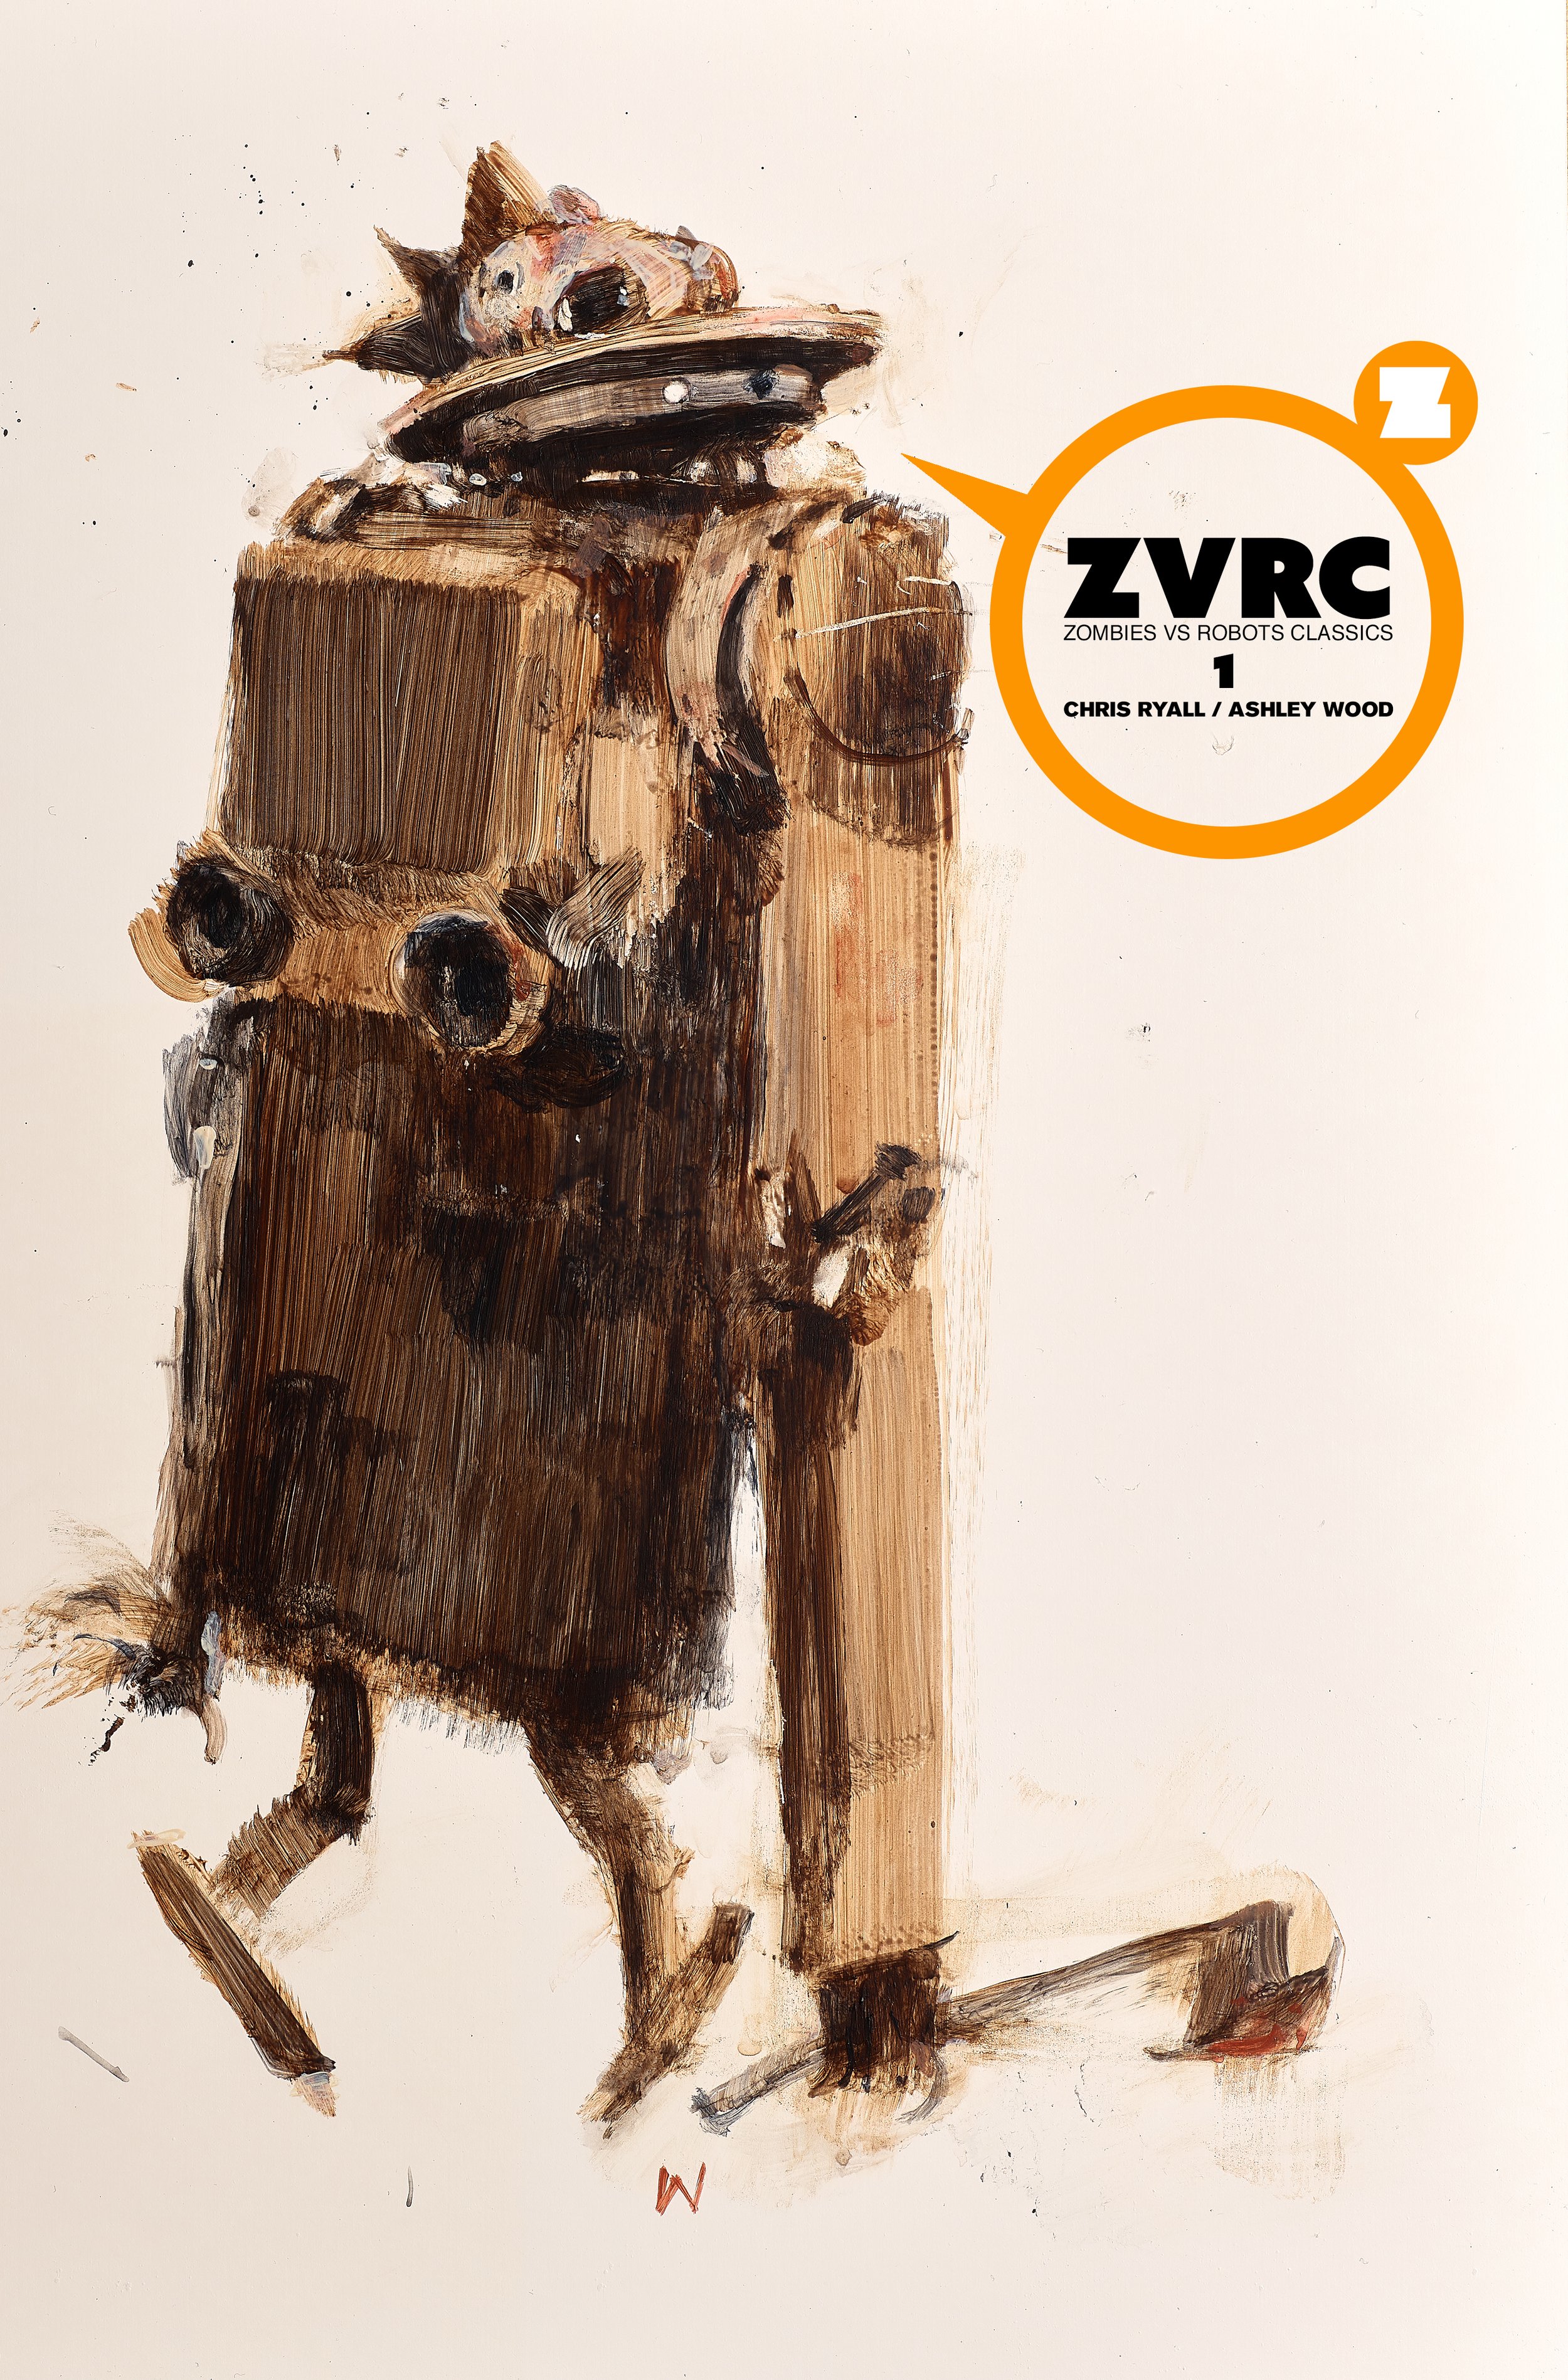 ZOMBIES VS ROBOTS CLASSICS BY CHRIS RYALL AND ASHLEY WOOD